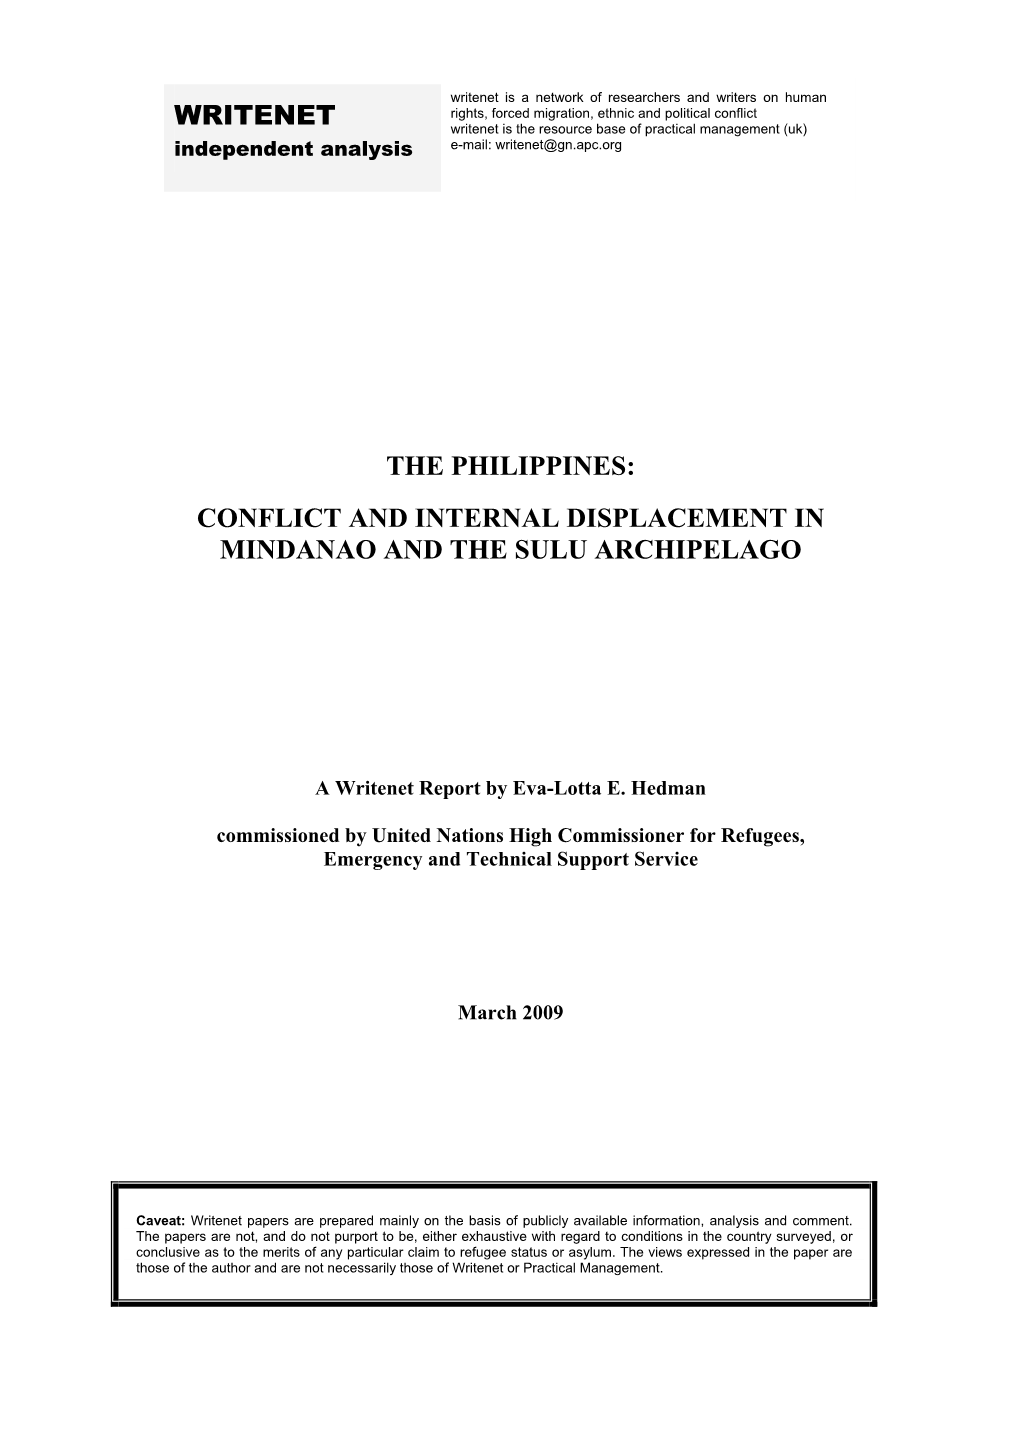 The Philippines: Conflict and Internal Displacement in Mindanao and the Sulu Archipelago Writenet